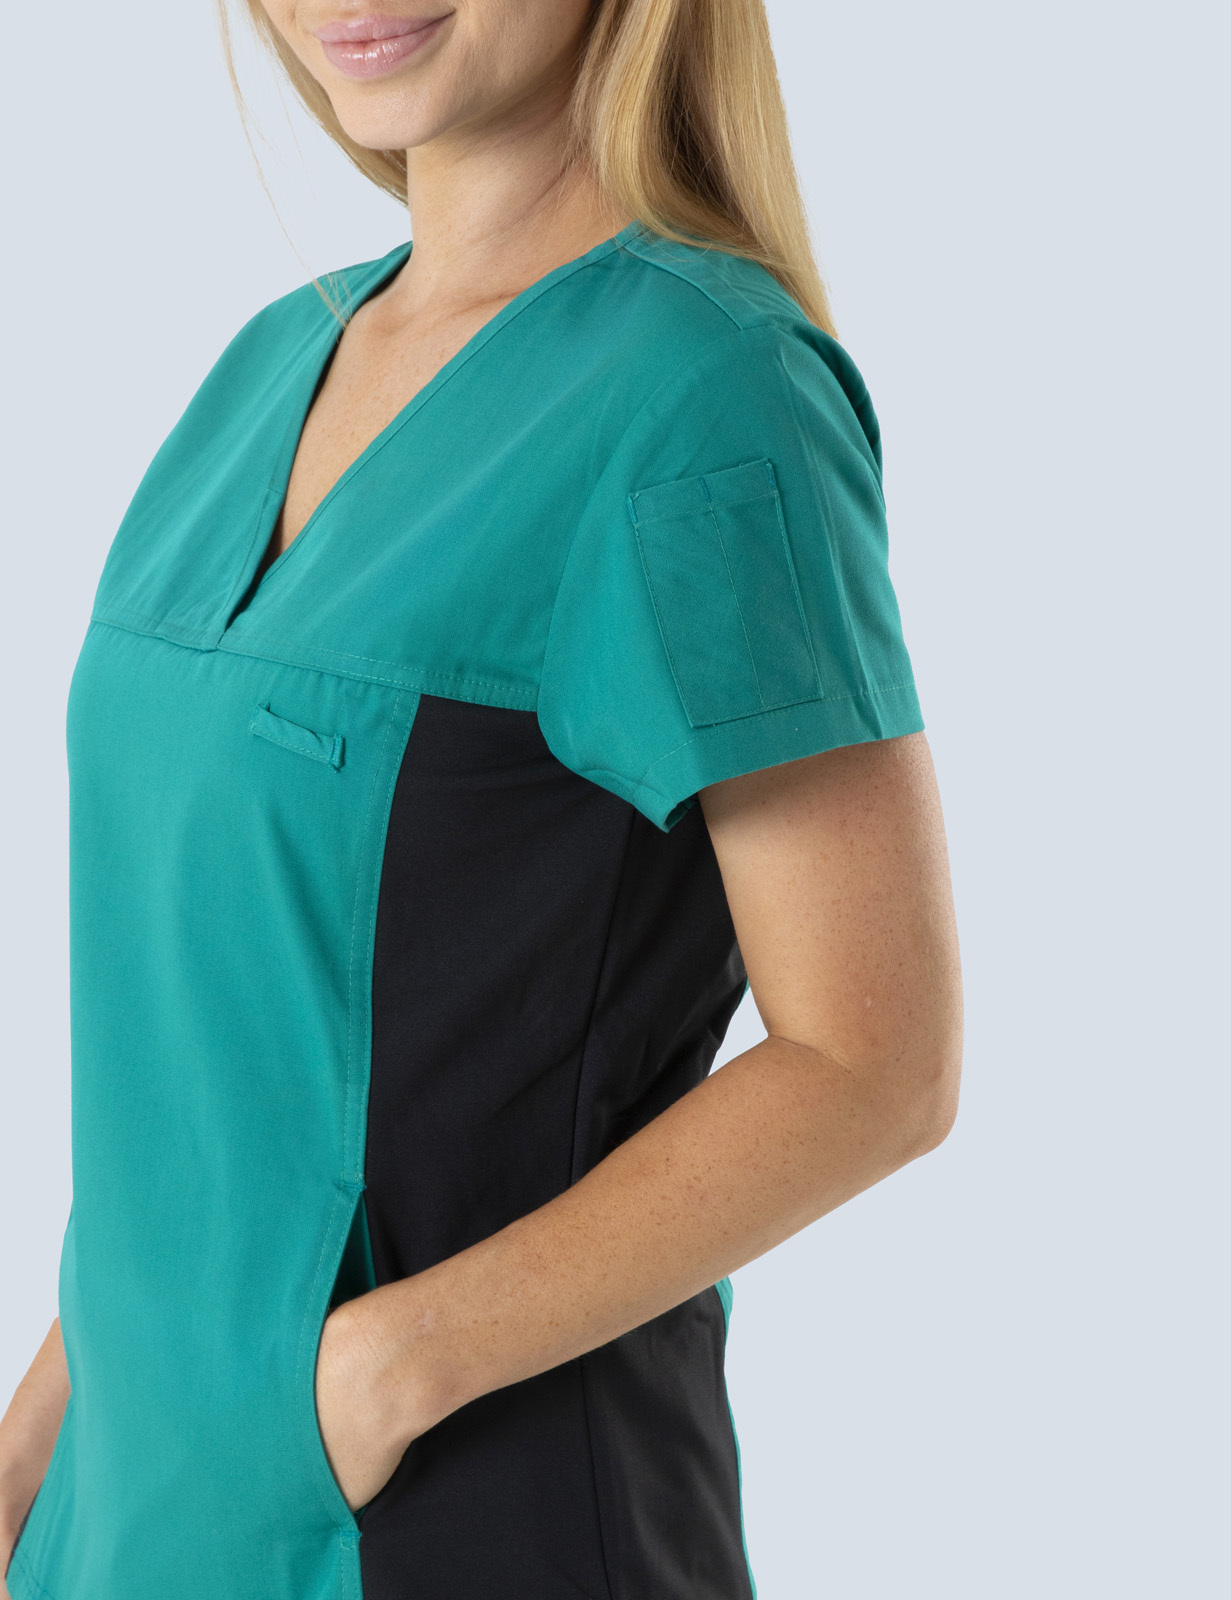 Women's Fit Solid Scrub Top With Spandex Panel - Hunter - Medium